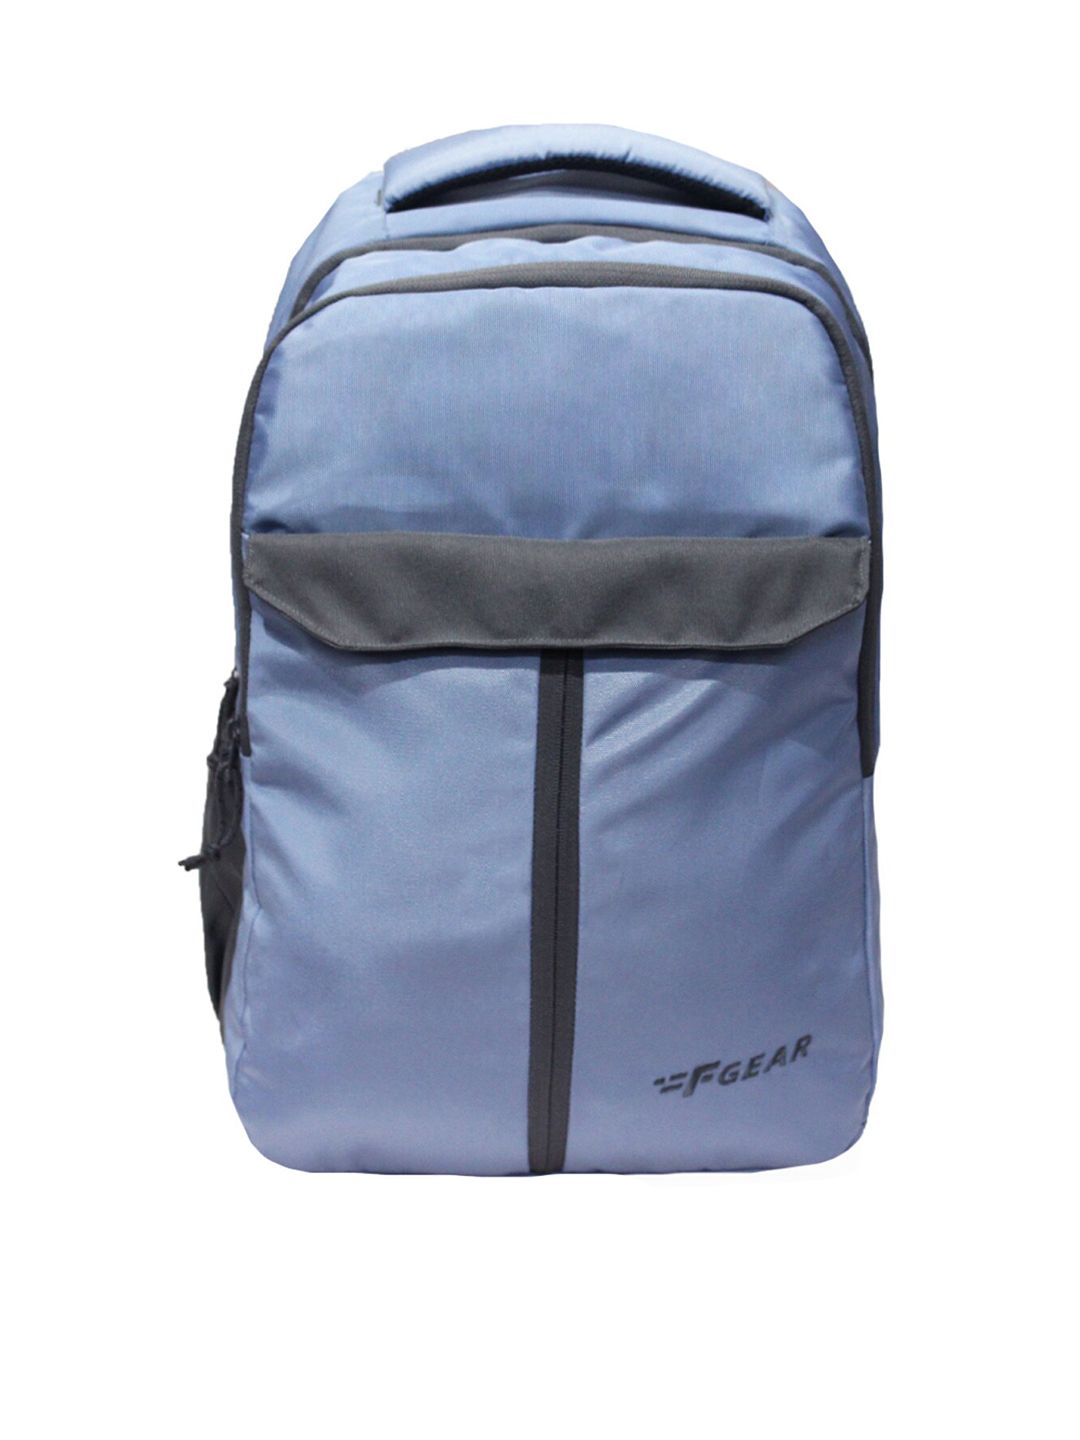 F Gear Unisex Lavender & Grey Solid Backpack Price in India